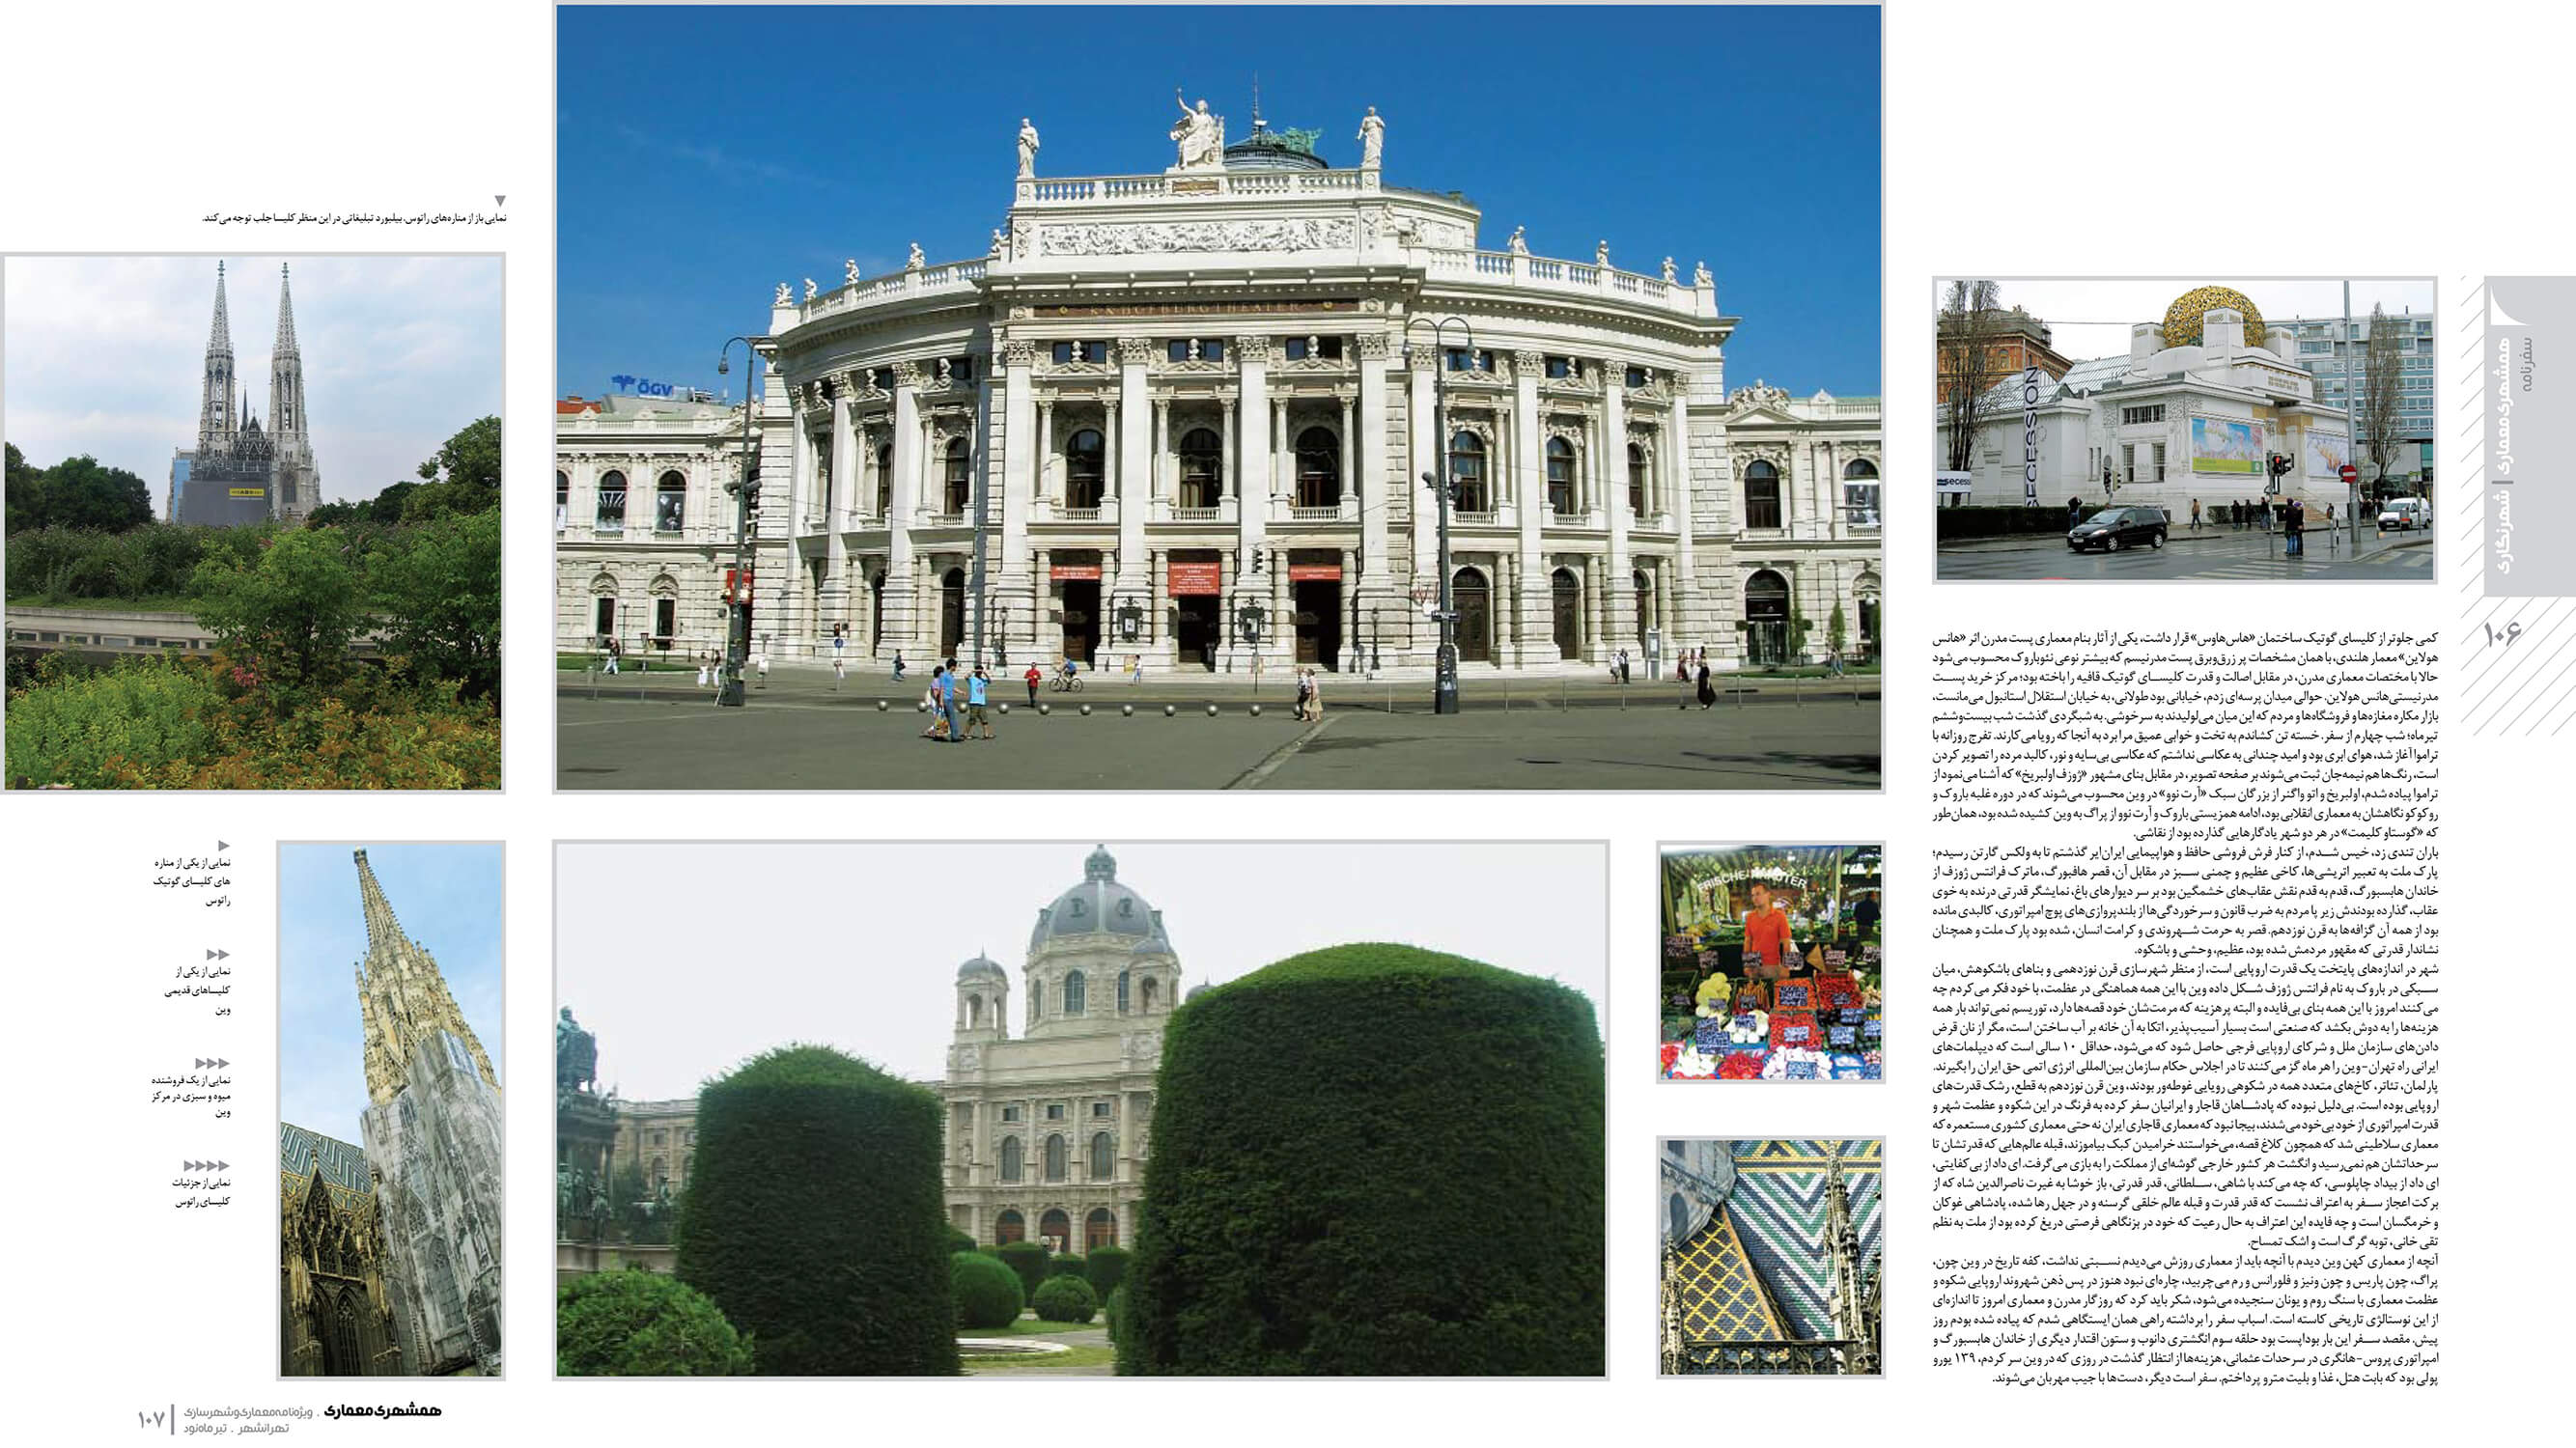 picture no. 3 of publication: Vienna, The Weight of Architectural History, author: Kambiz Moshtaq